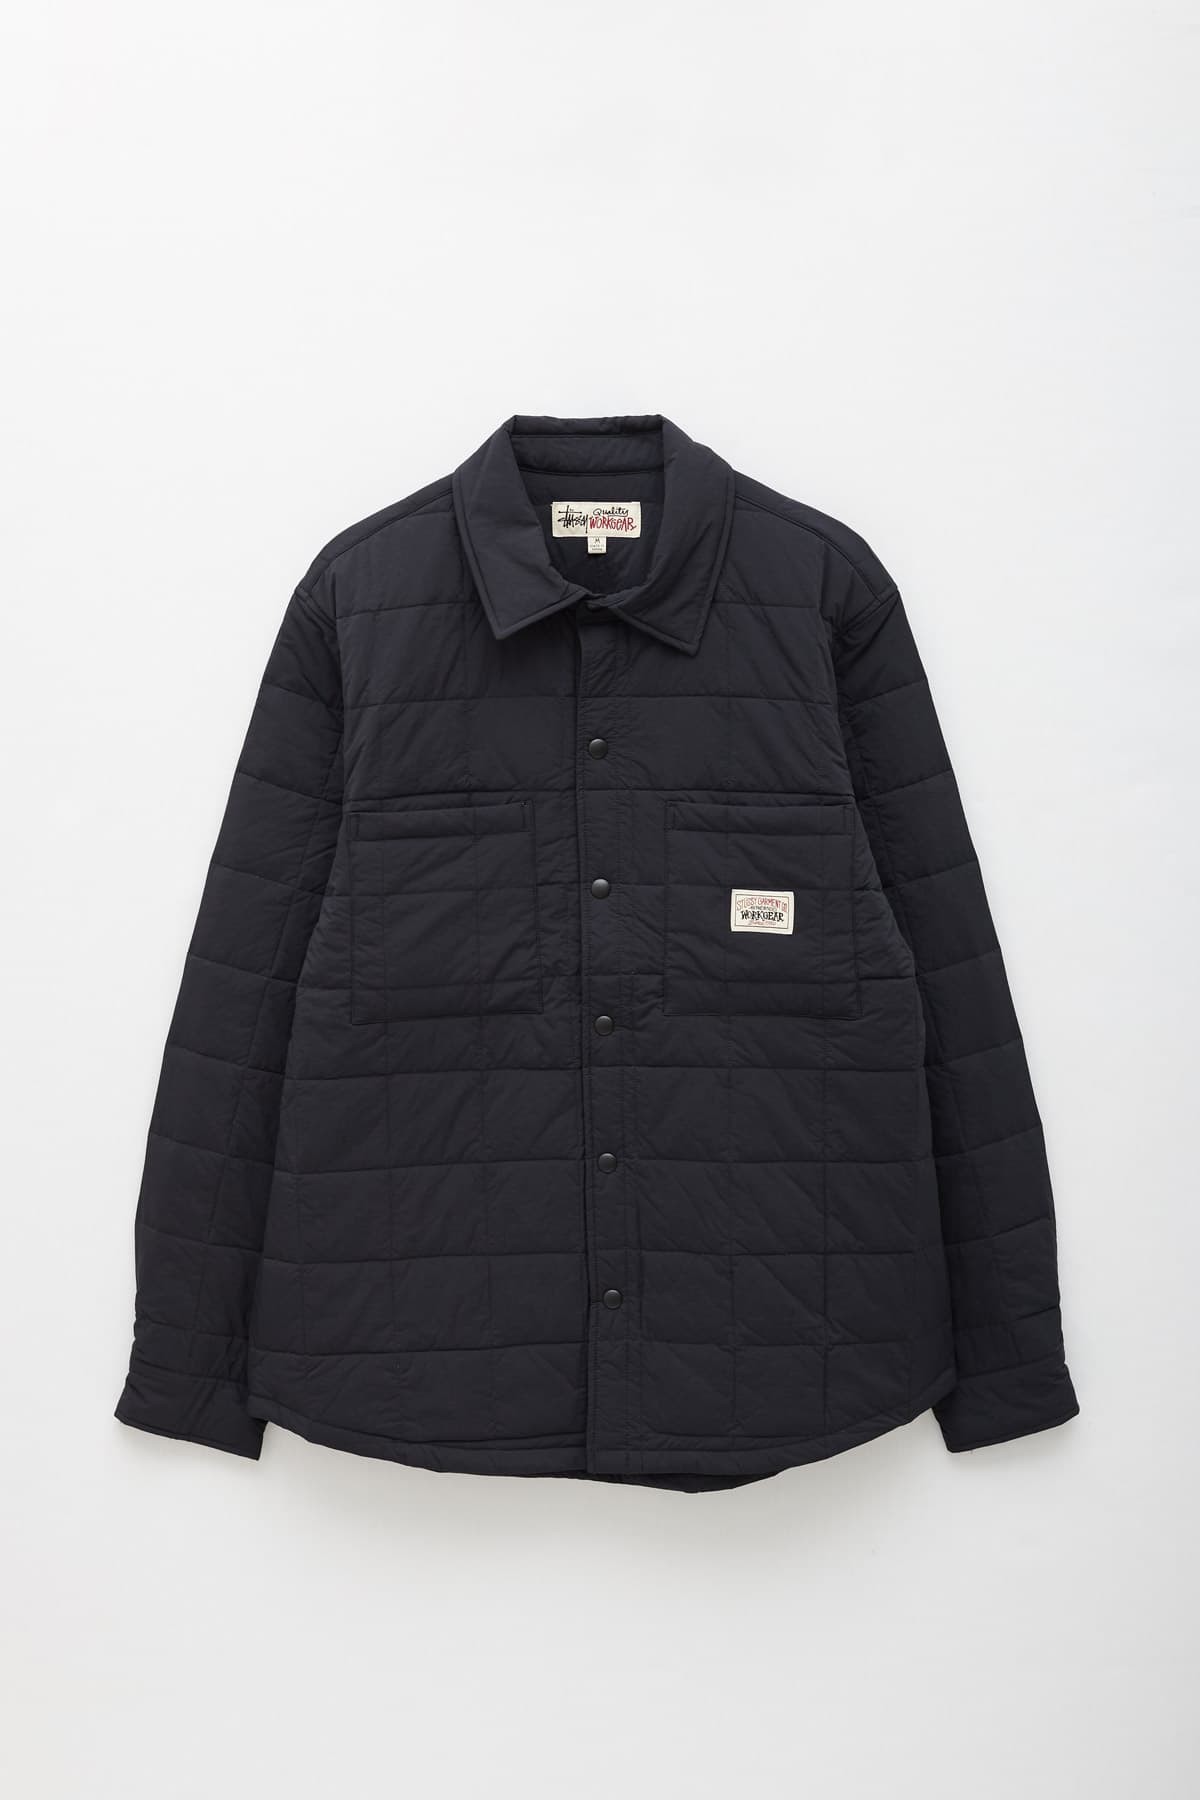 STUSSY BLACK QUILTED FATIGUE OVERSHIRT IAMNUE